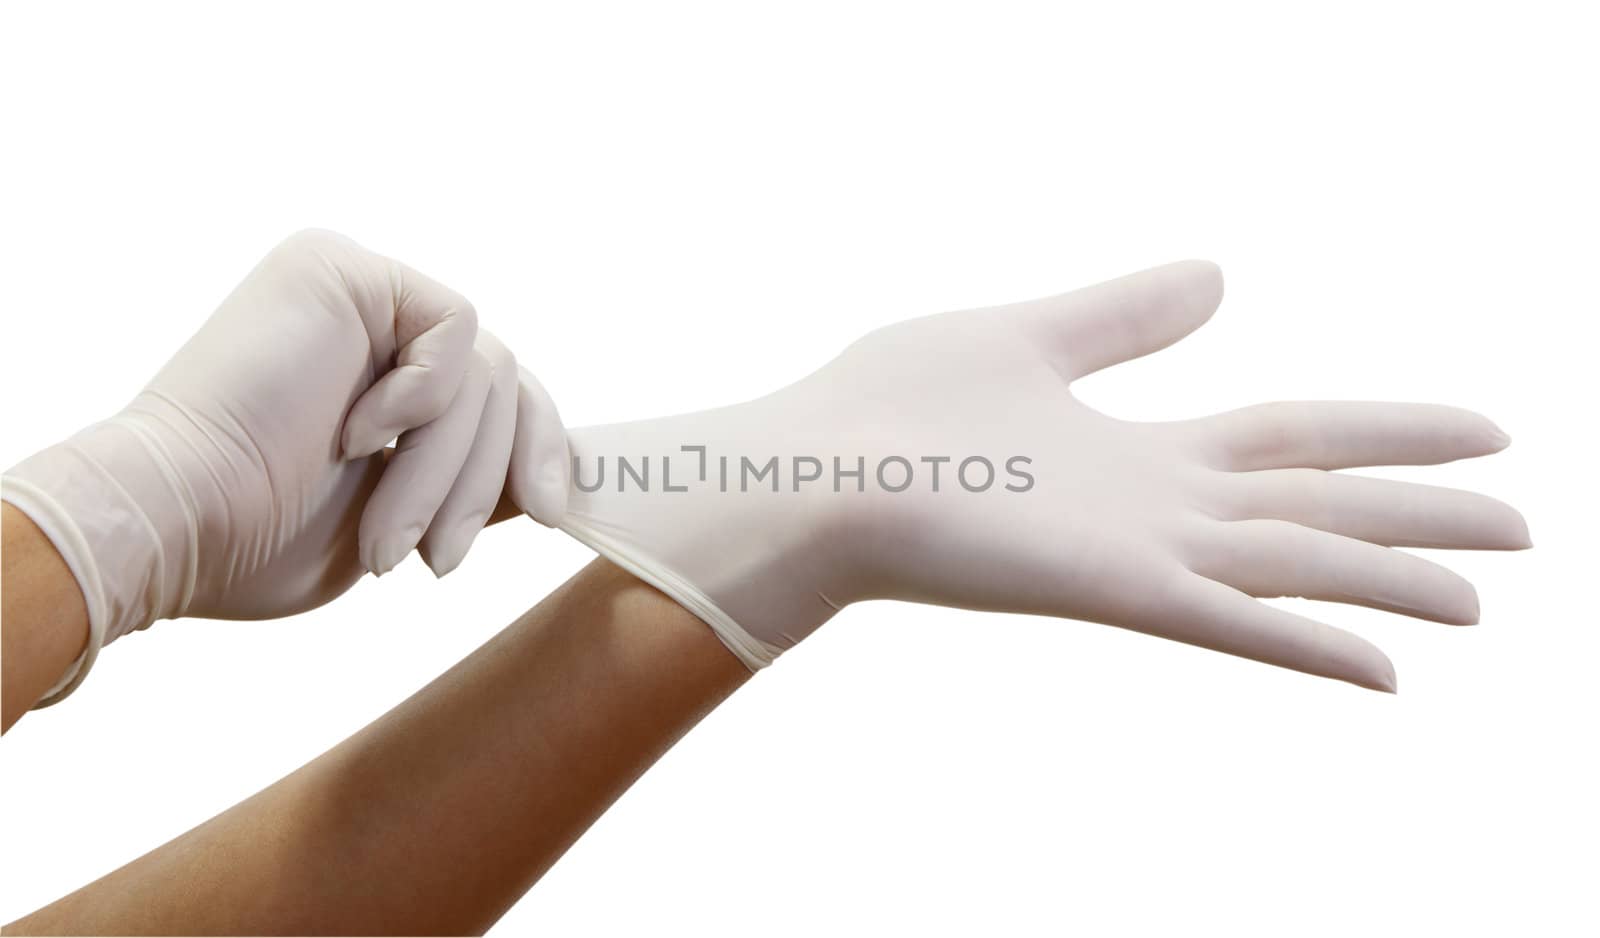 Woman's hands putting on surgical gloves-isolation over white background with clipping path.